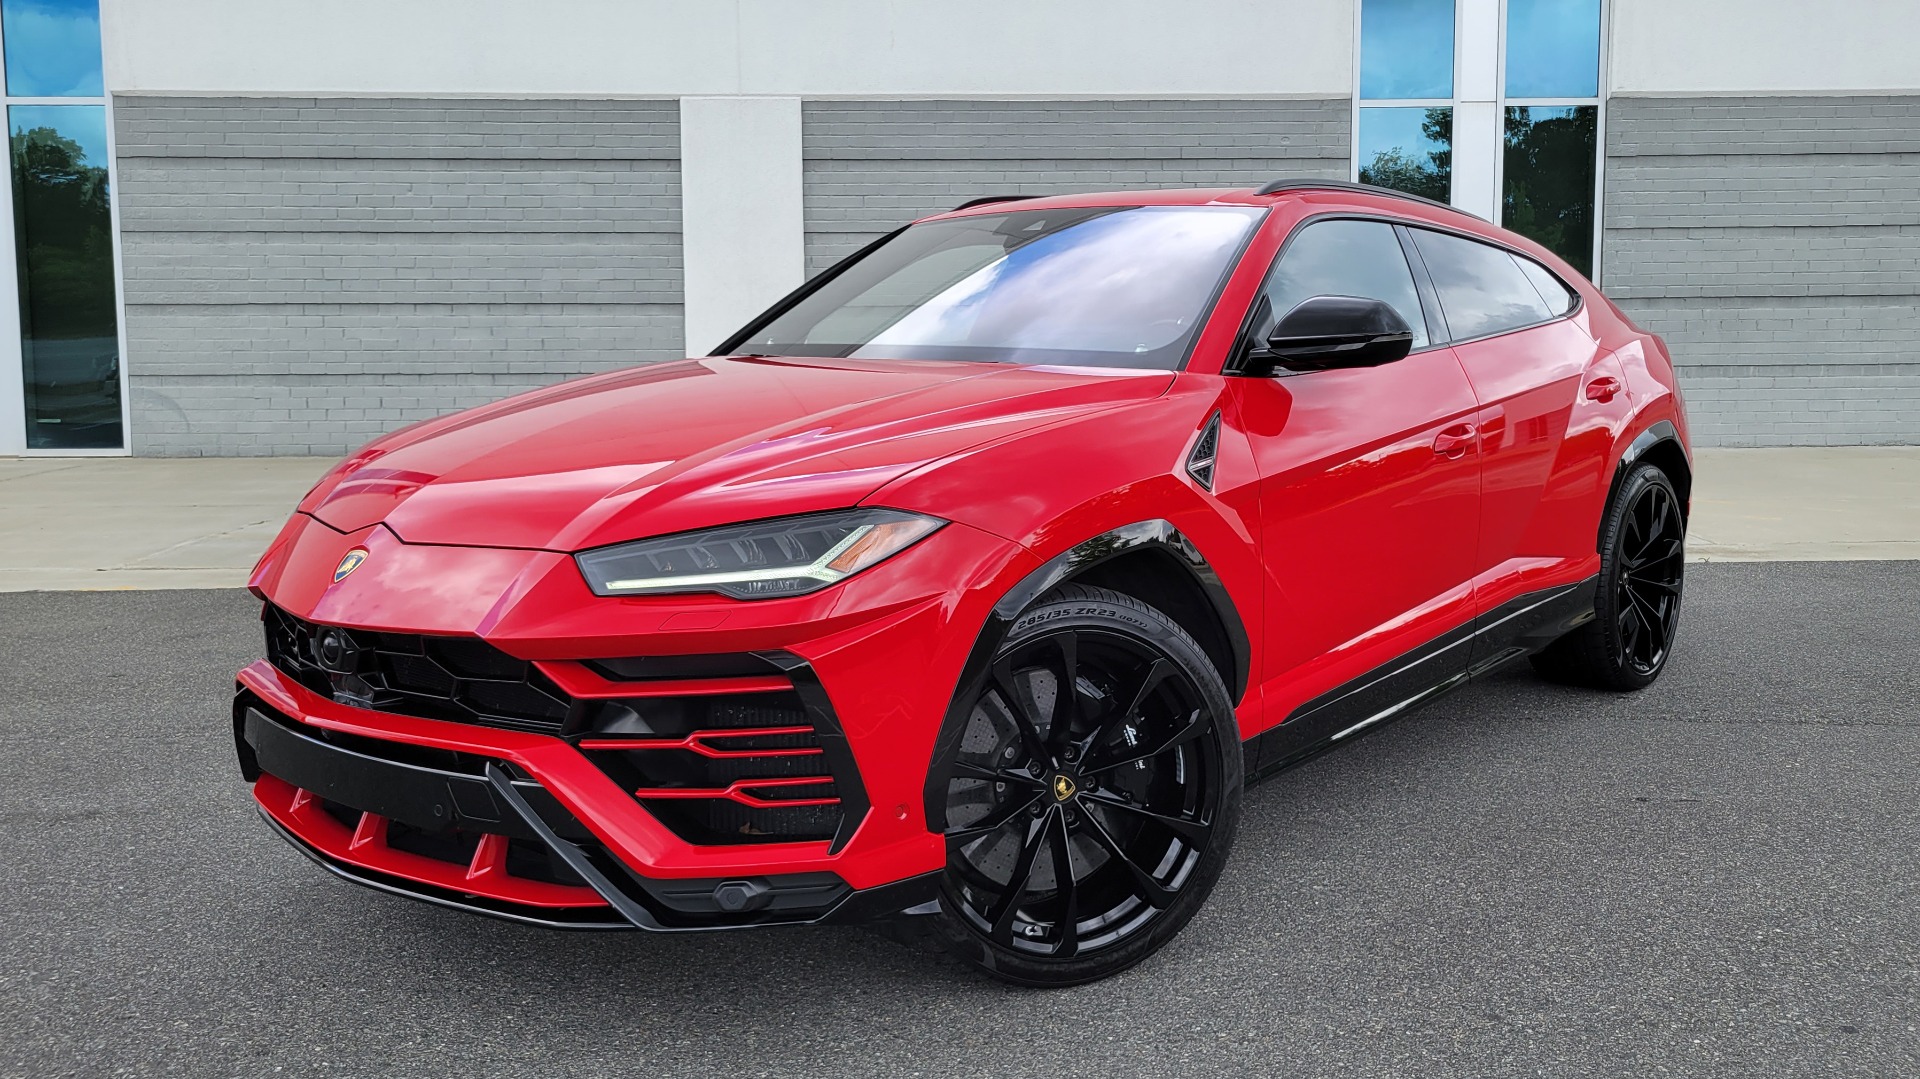 Used 2019 Lamborghini URUS 4.0L V8 / AUTO / AWD / NAV / SUNROOF / LEATHER / REARVIEW for sale Sold at Formula Imports in Charlotte NC 28227 6